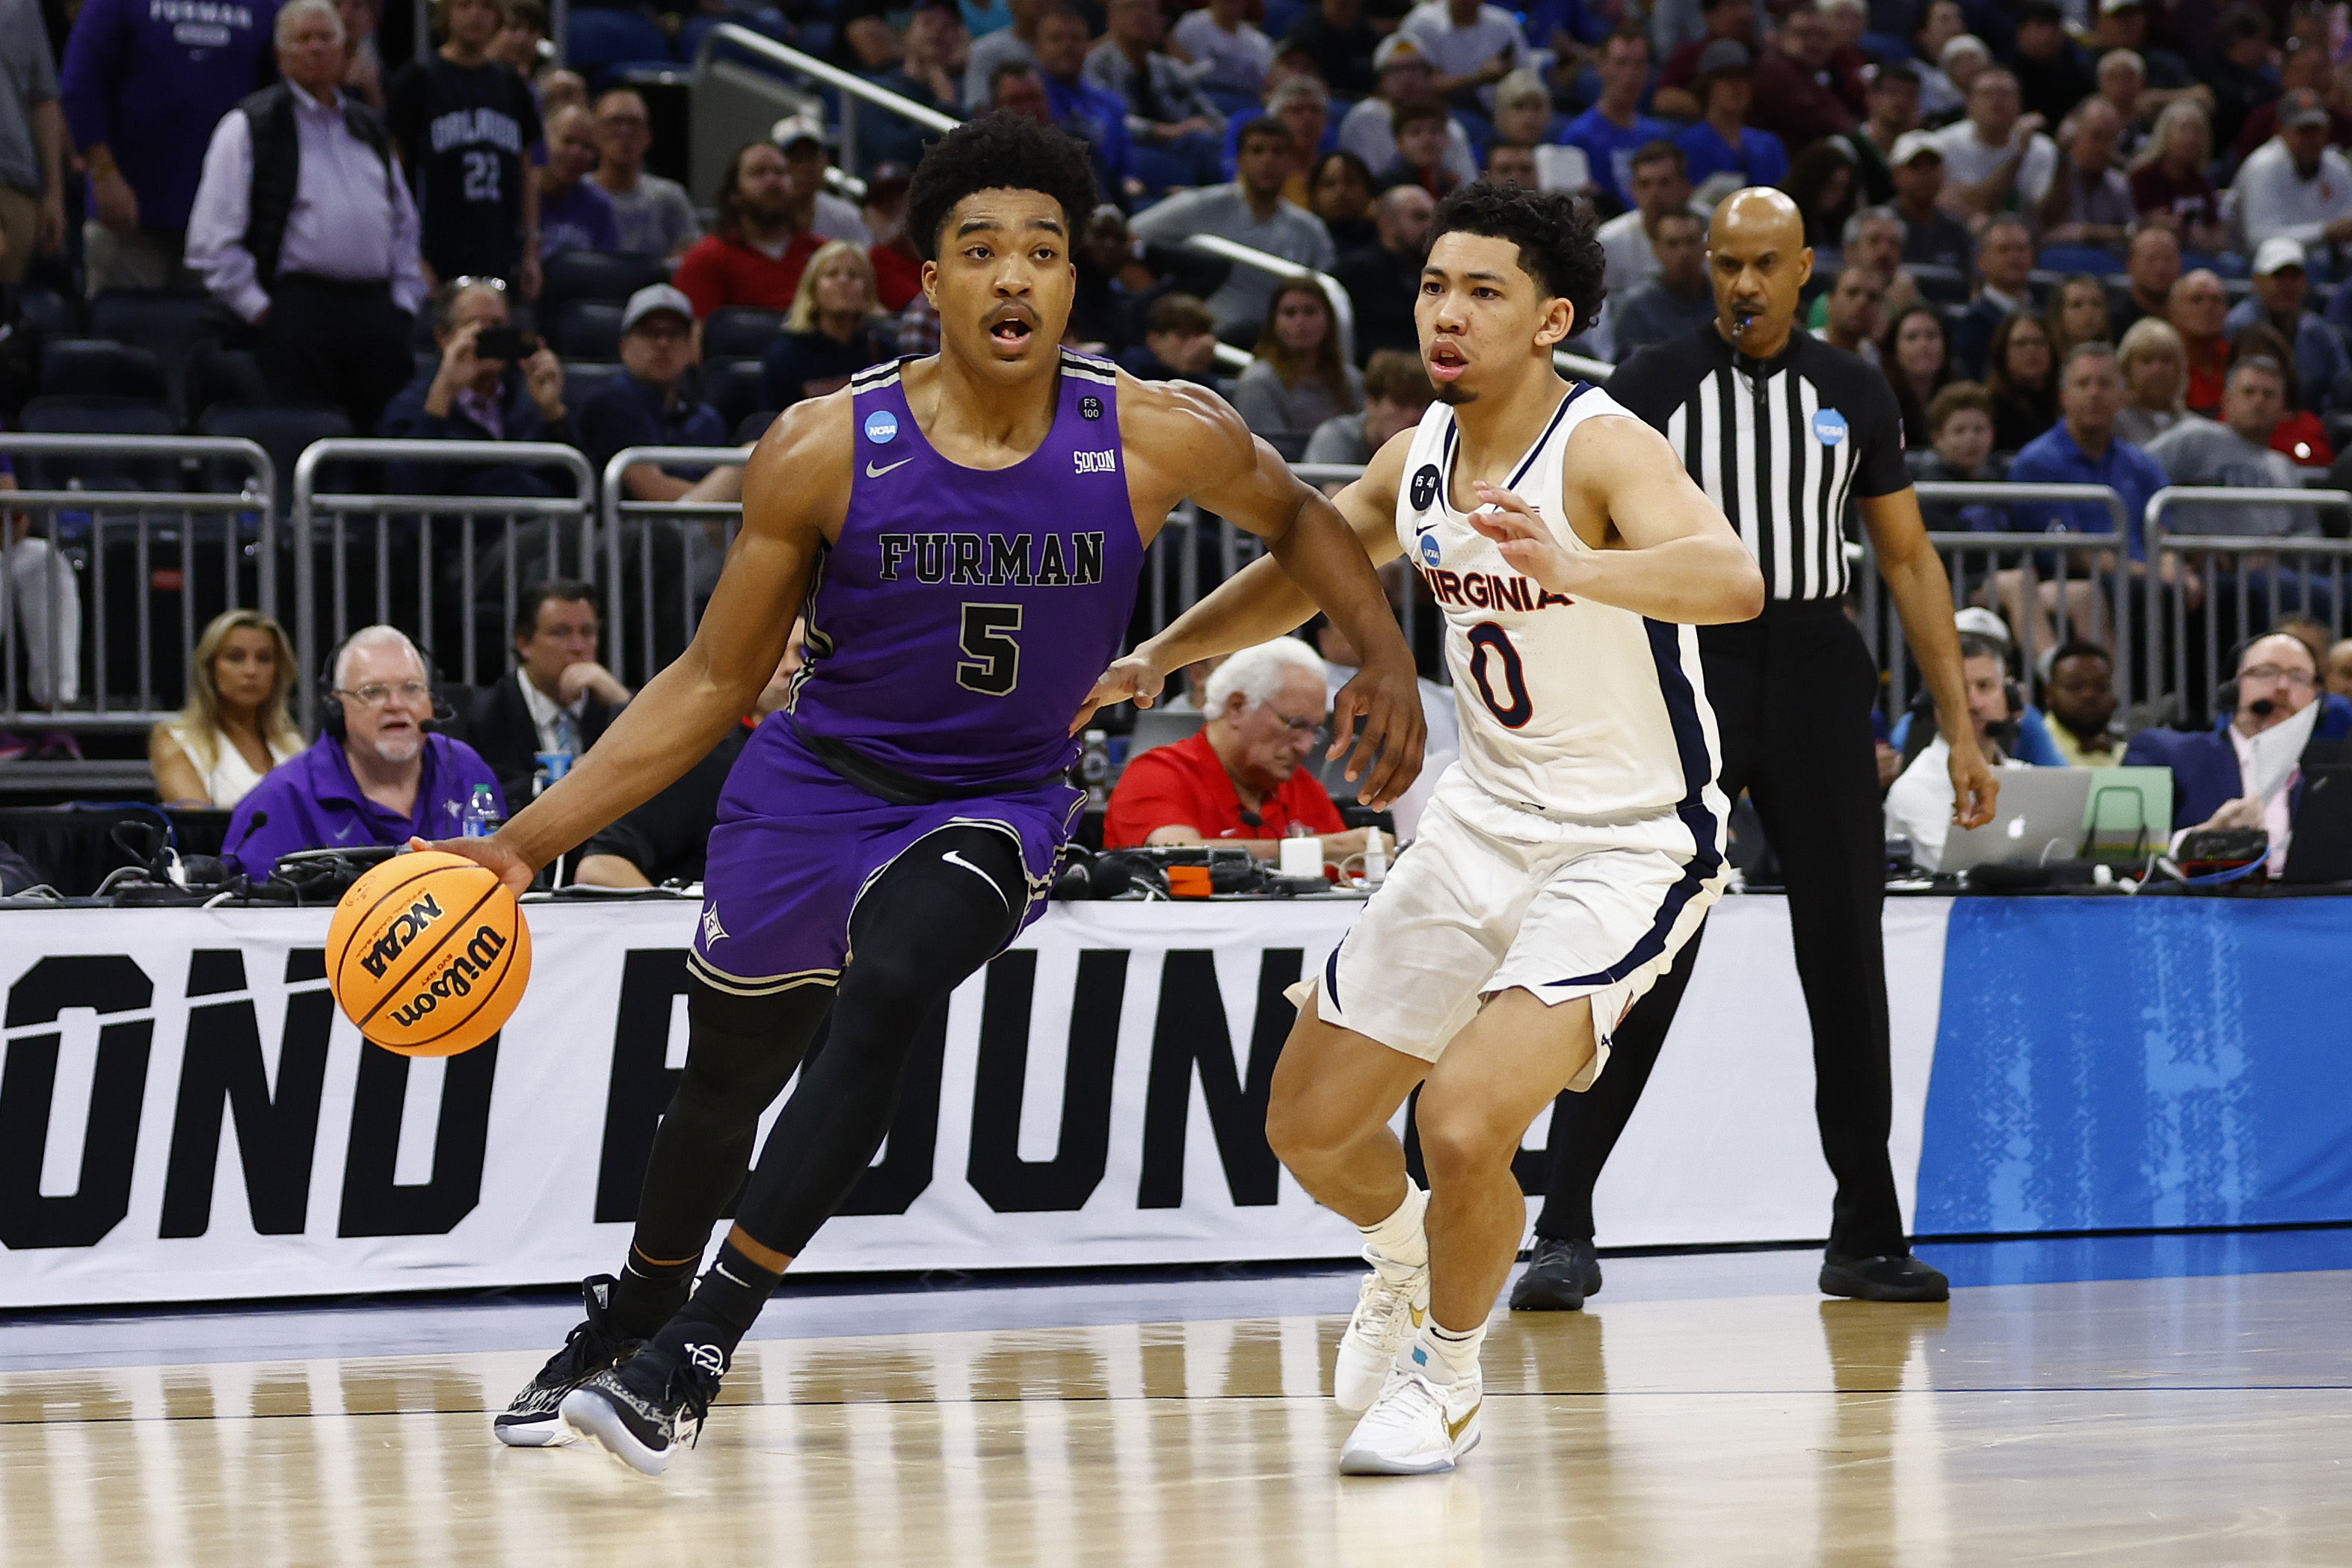 Marcus Foster of the Furman Paladins dribbles the ball against Kihei Clark #0 of the Virginia Cavaliers during the second half in the first round of the NCAA Men’s Basketball Tournament at Amway Center on March 16, 2023 in Orlando, Florida.